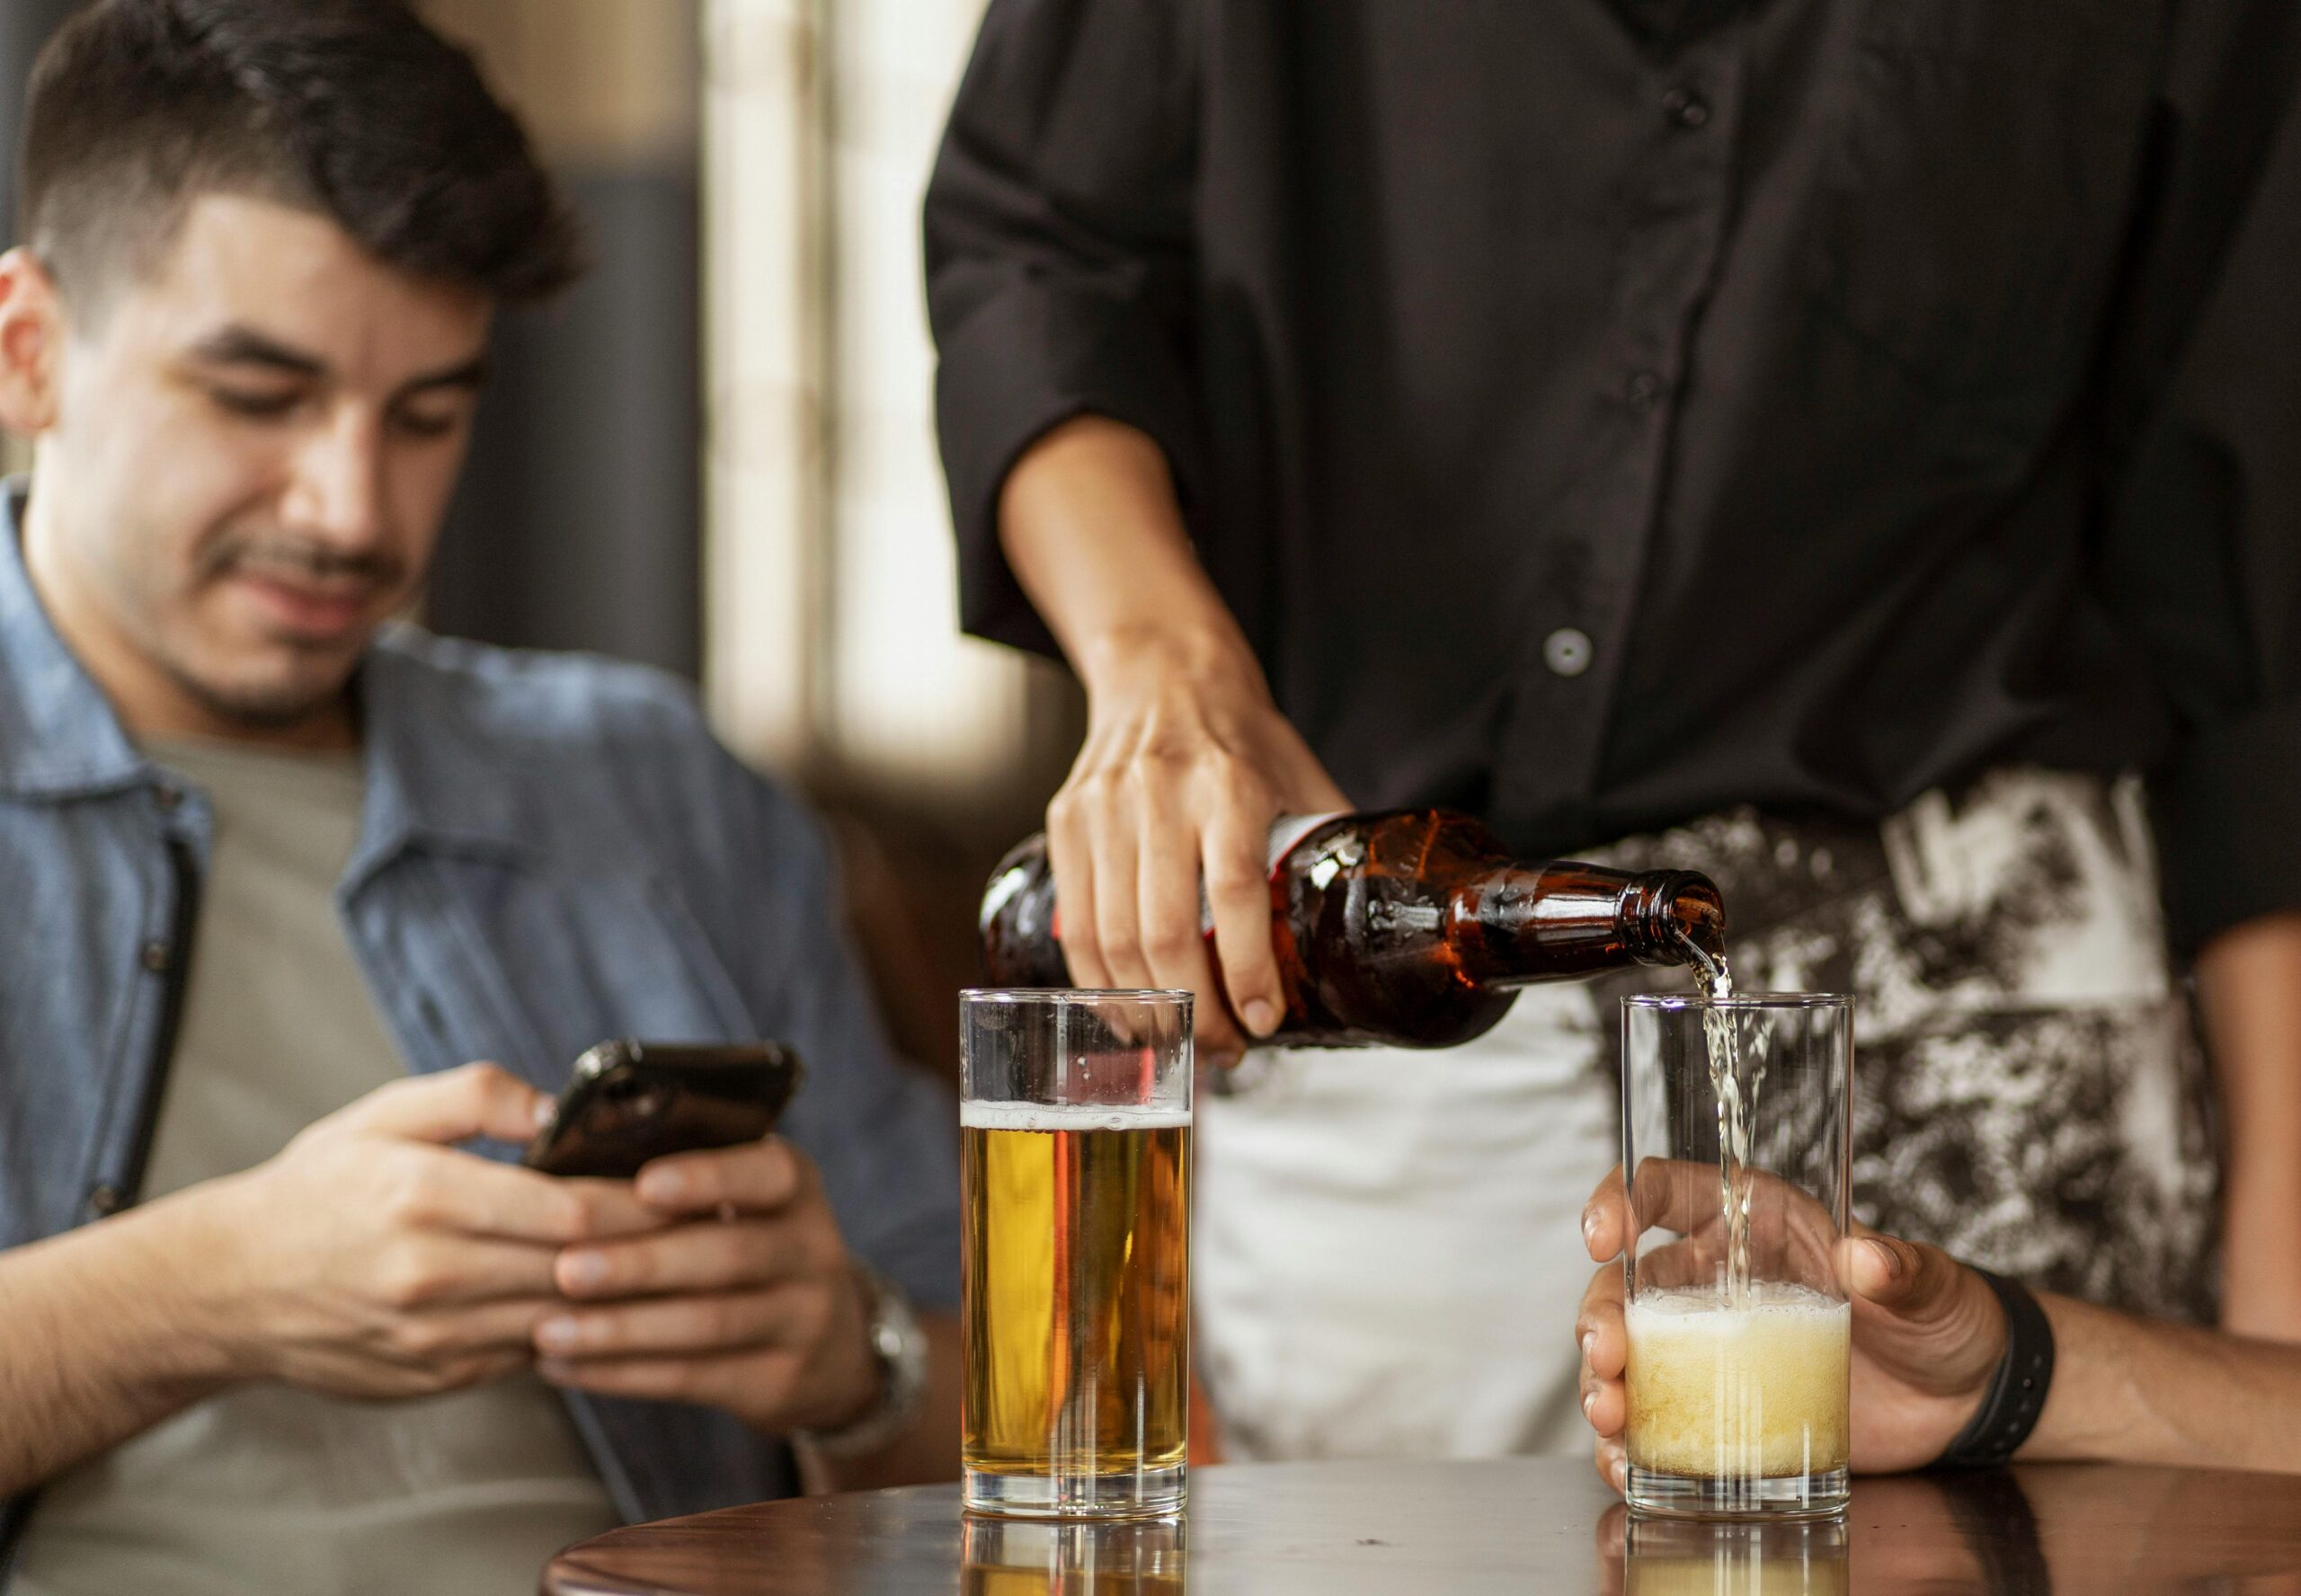 Young man using cell phone at a bar with friends.